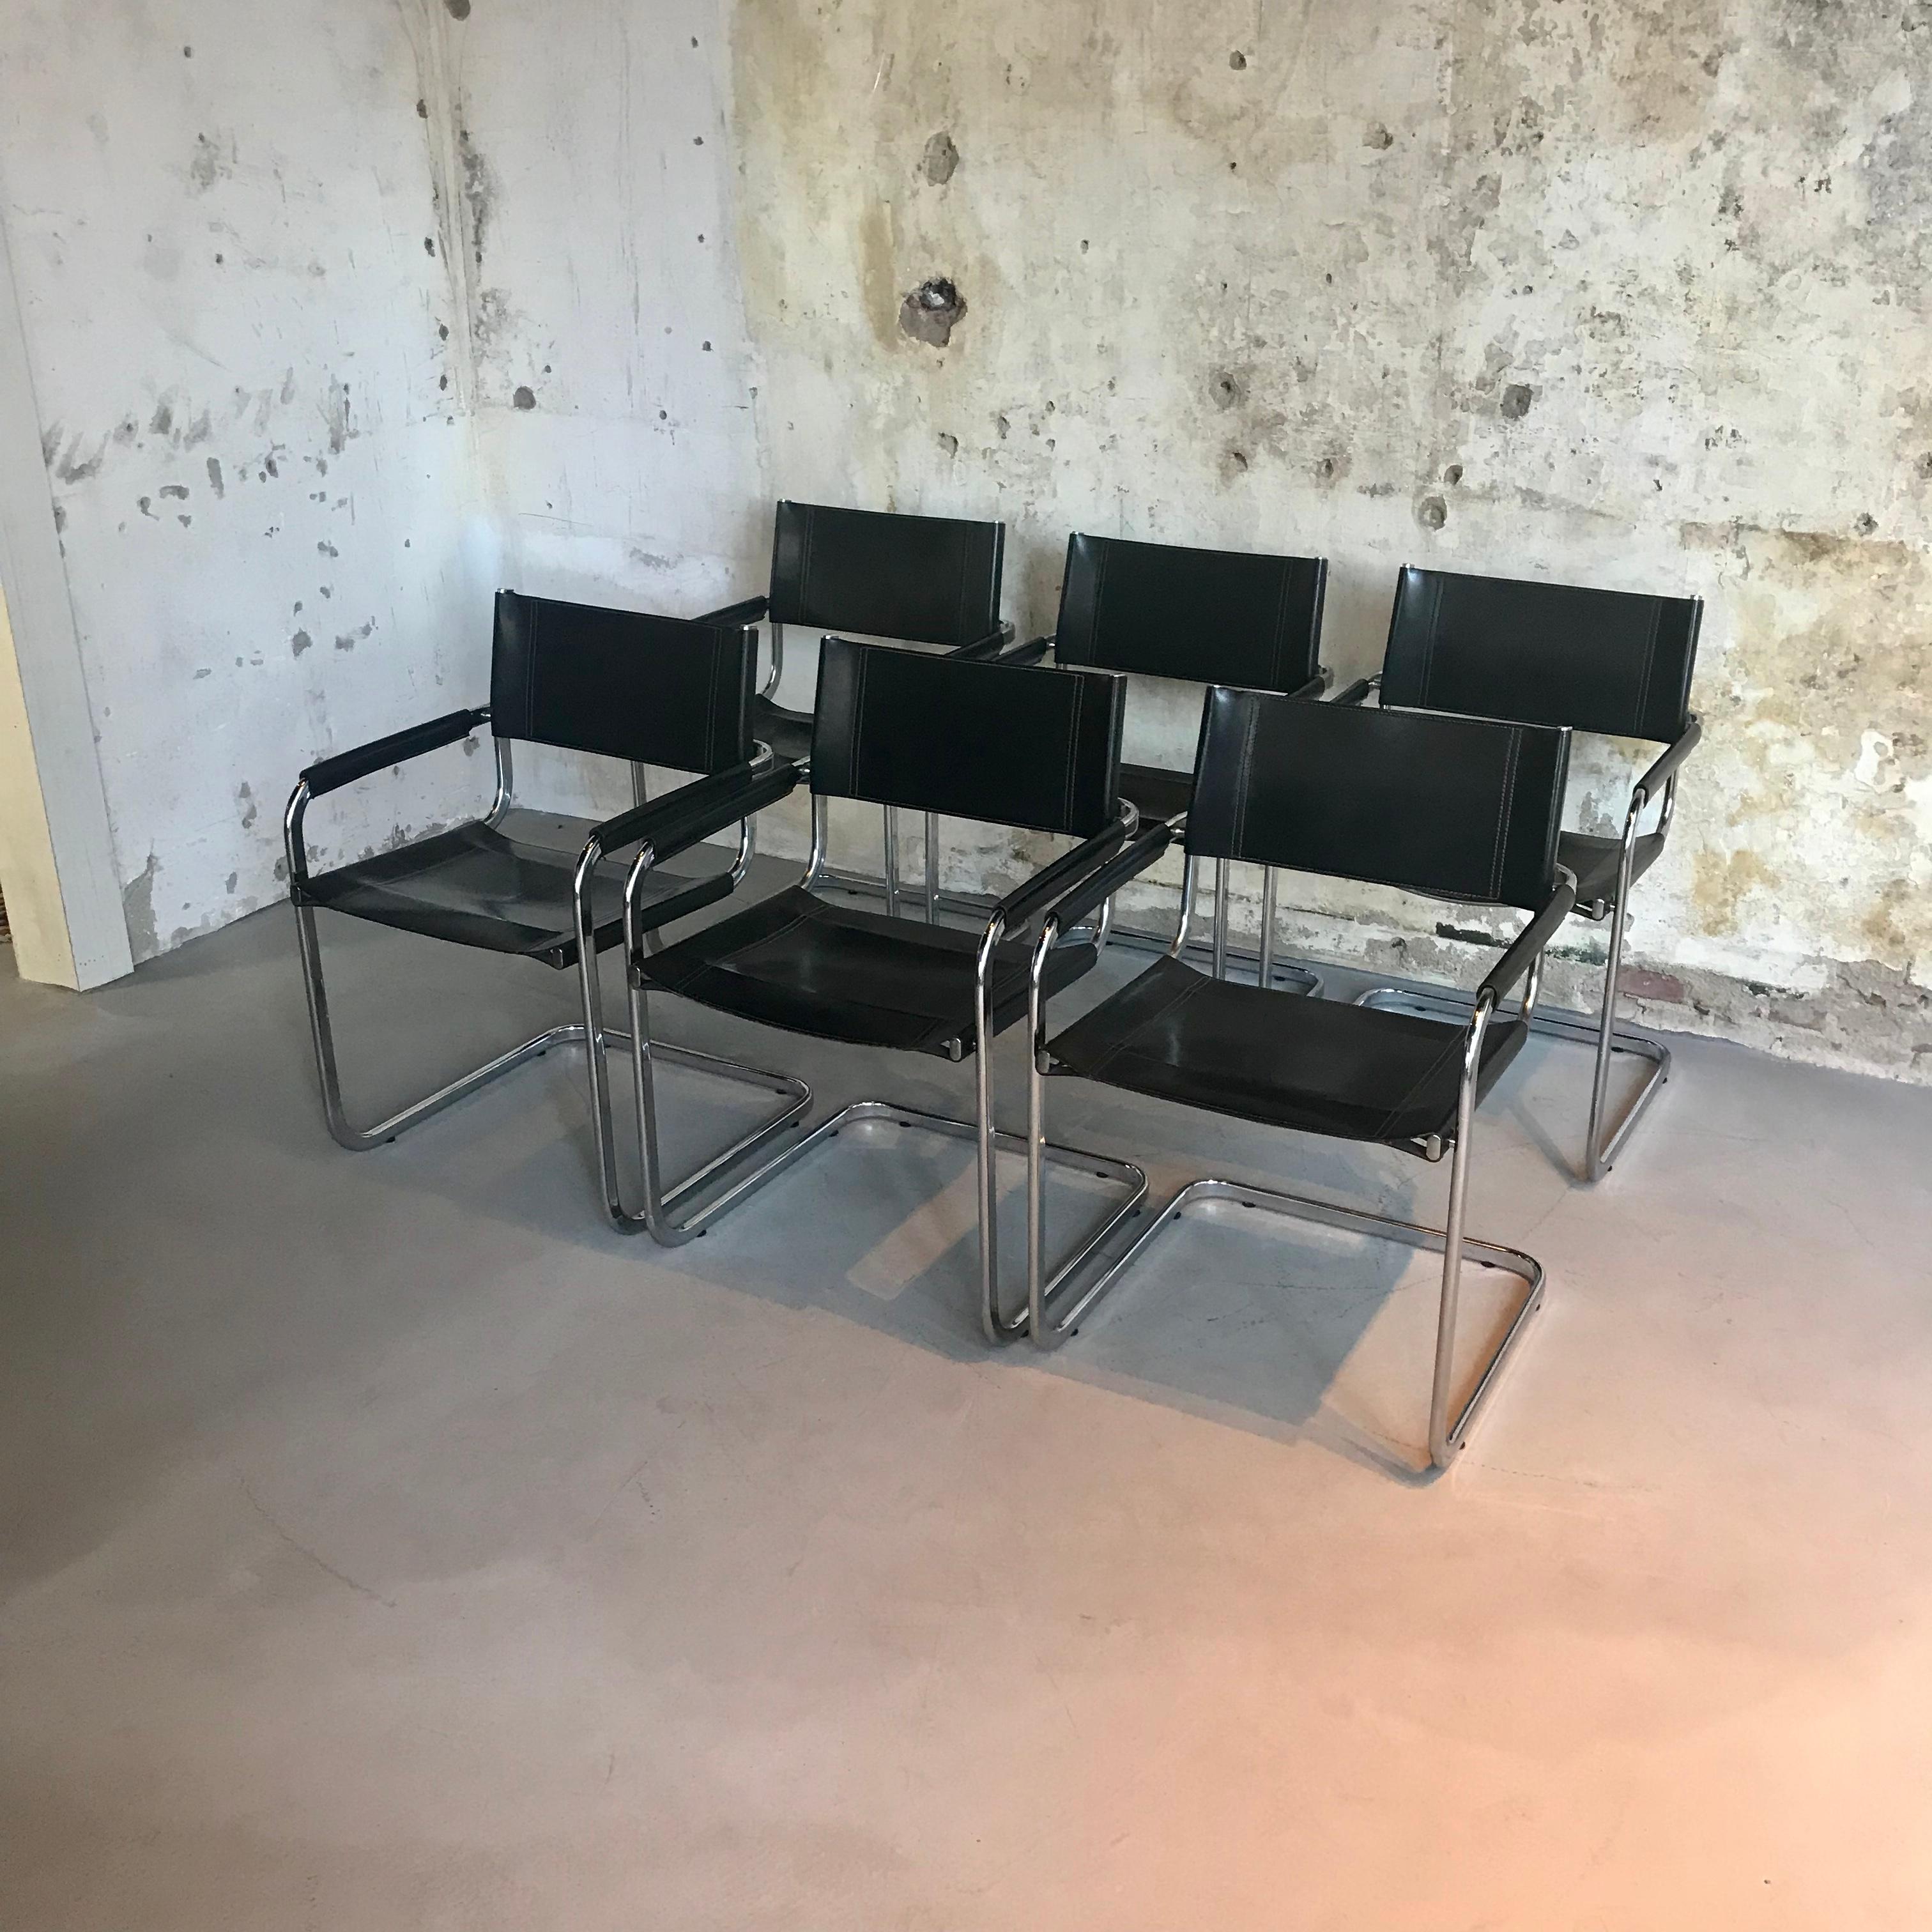 Extremely rare set of six chrome-plated tubular cantilever chairs from the 1970s, designed by Eero Aarnio for Mobel Italia.
Mobel Italia was a famous Italian manufacturer during the 1960s and 1970s.
Excellent vintage condition. All chairs has the